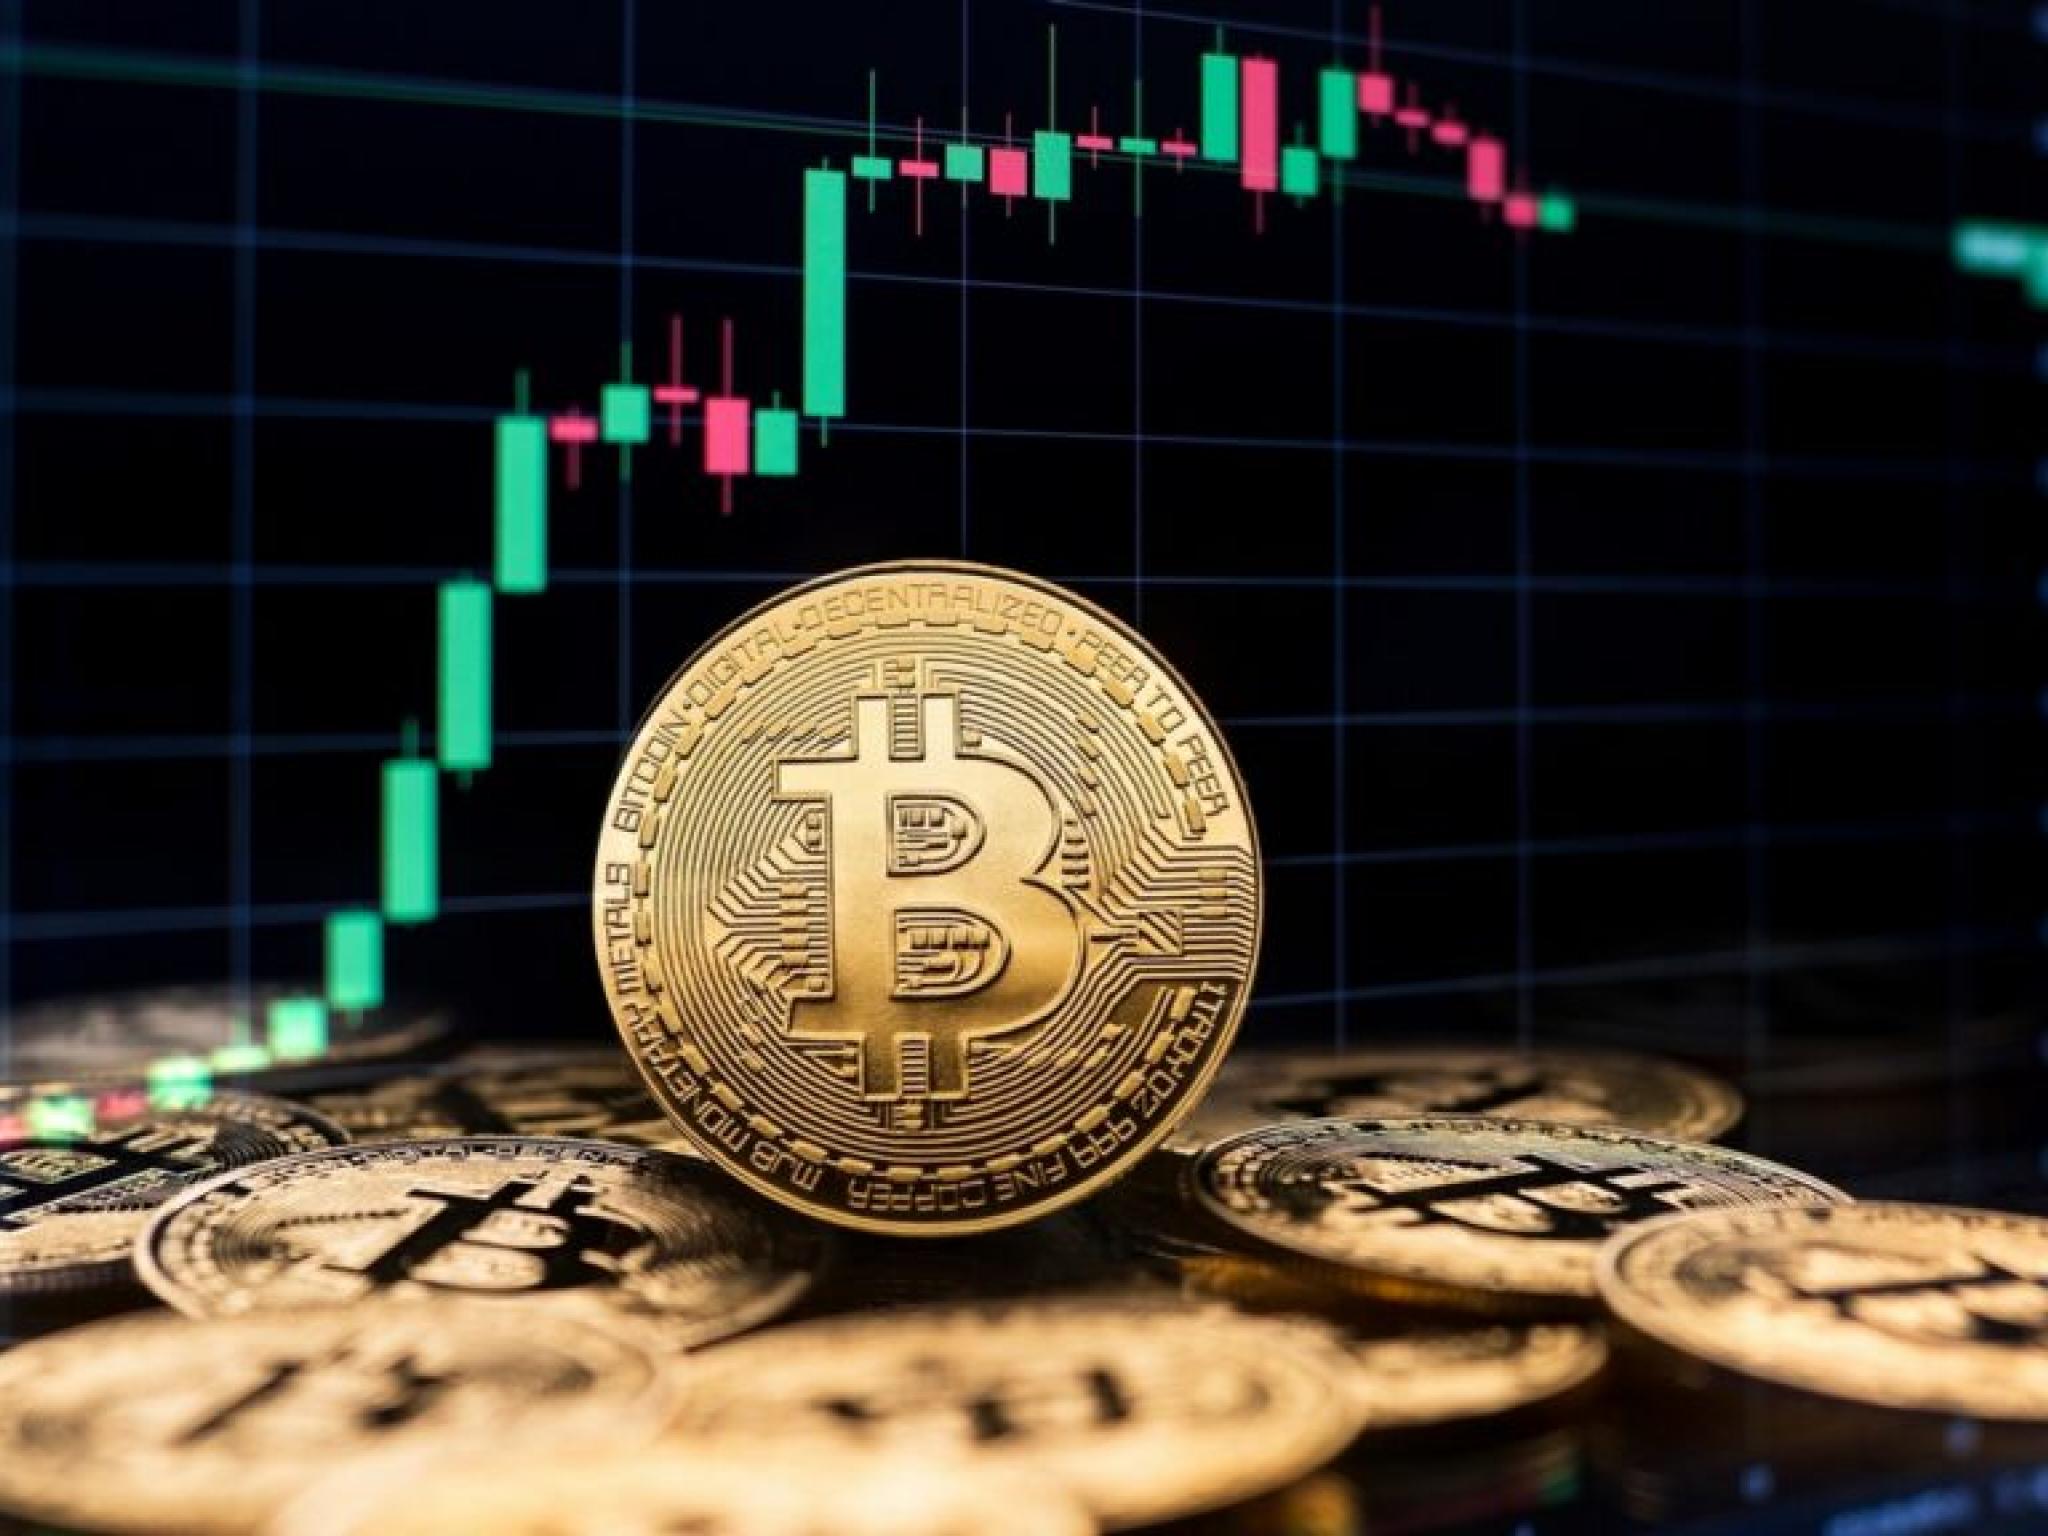  bitcoin-may-face-another-correction-dropping-to-55000-predicts-crypto-analyst 